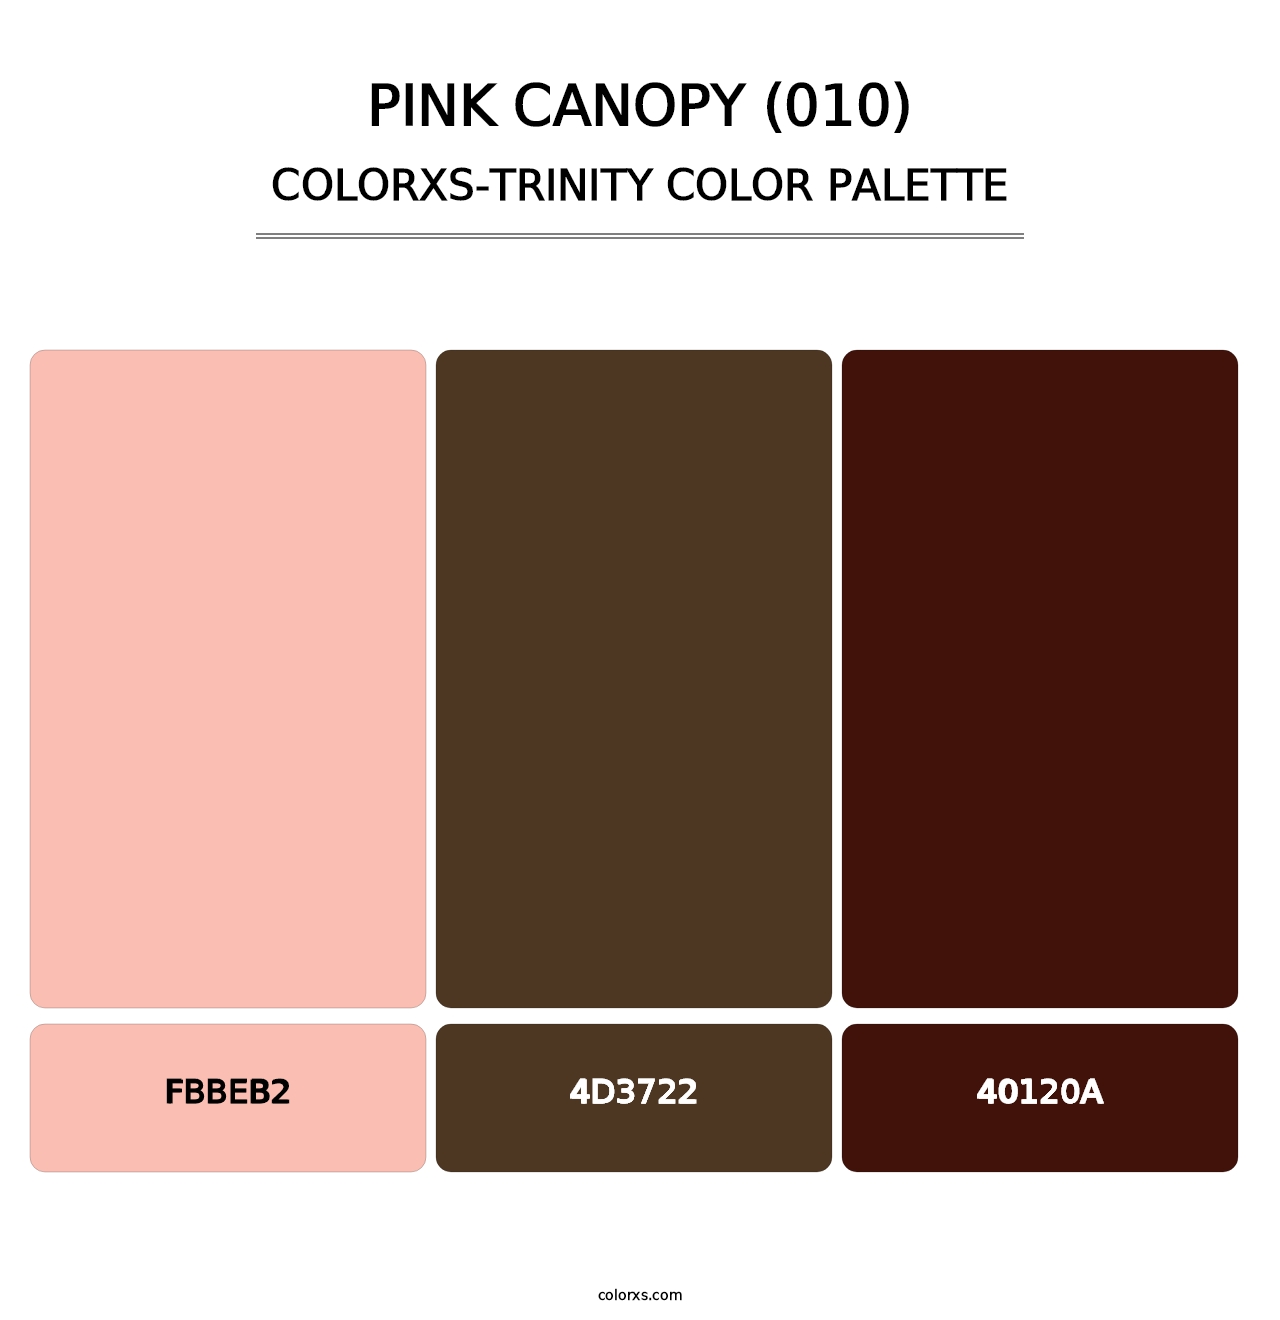 Pink Canopy (010) - Colorxs Trinity Palette